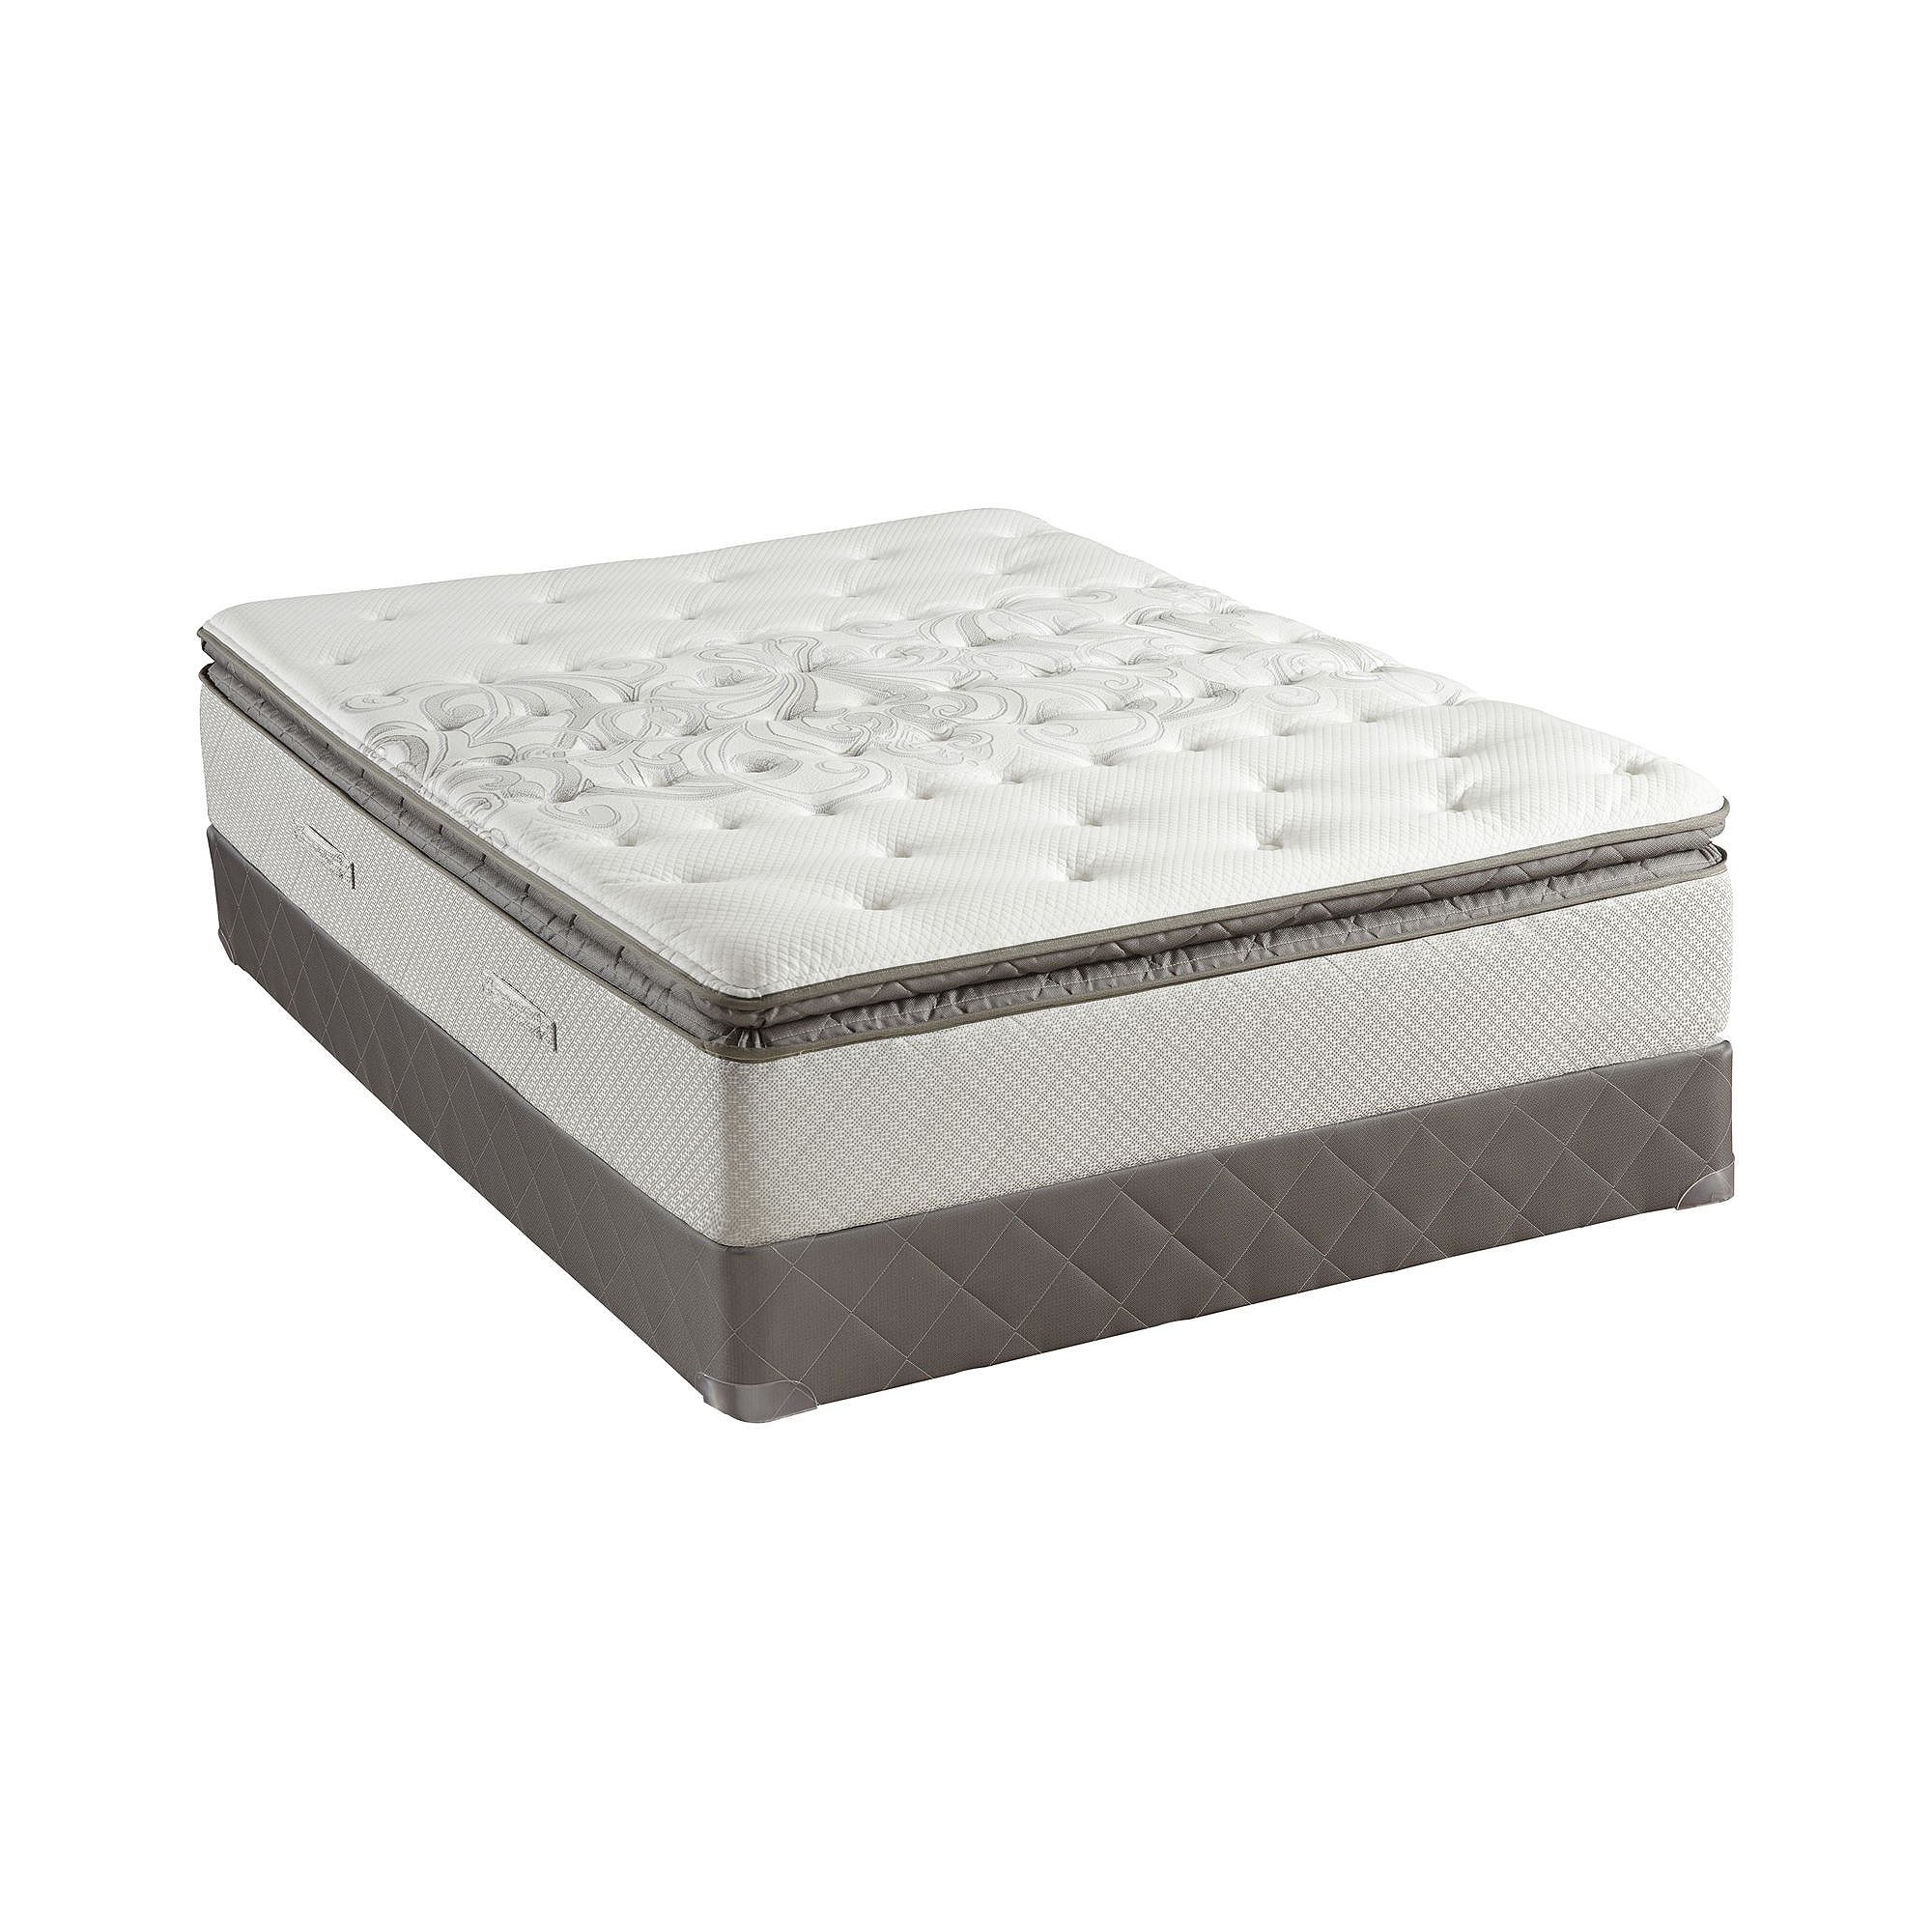 Sealy Posturepedic West Plains Cushion-Firm EPT Mattress and Box Spring (White)